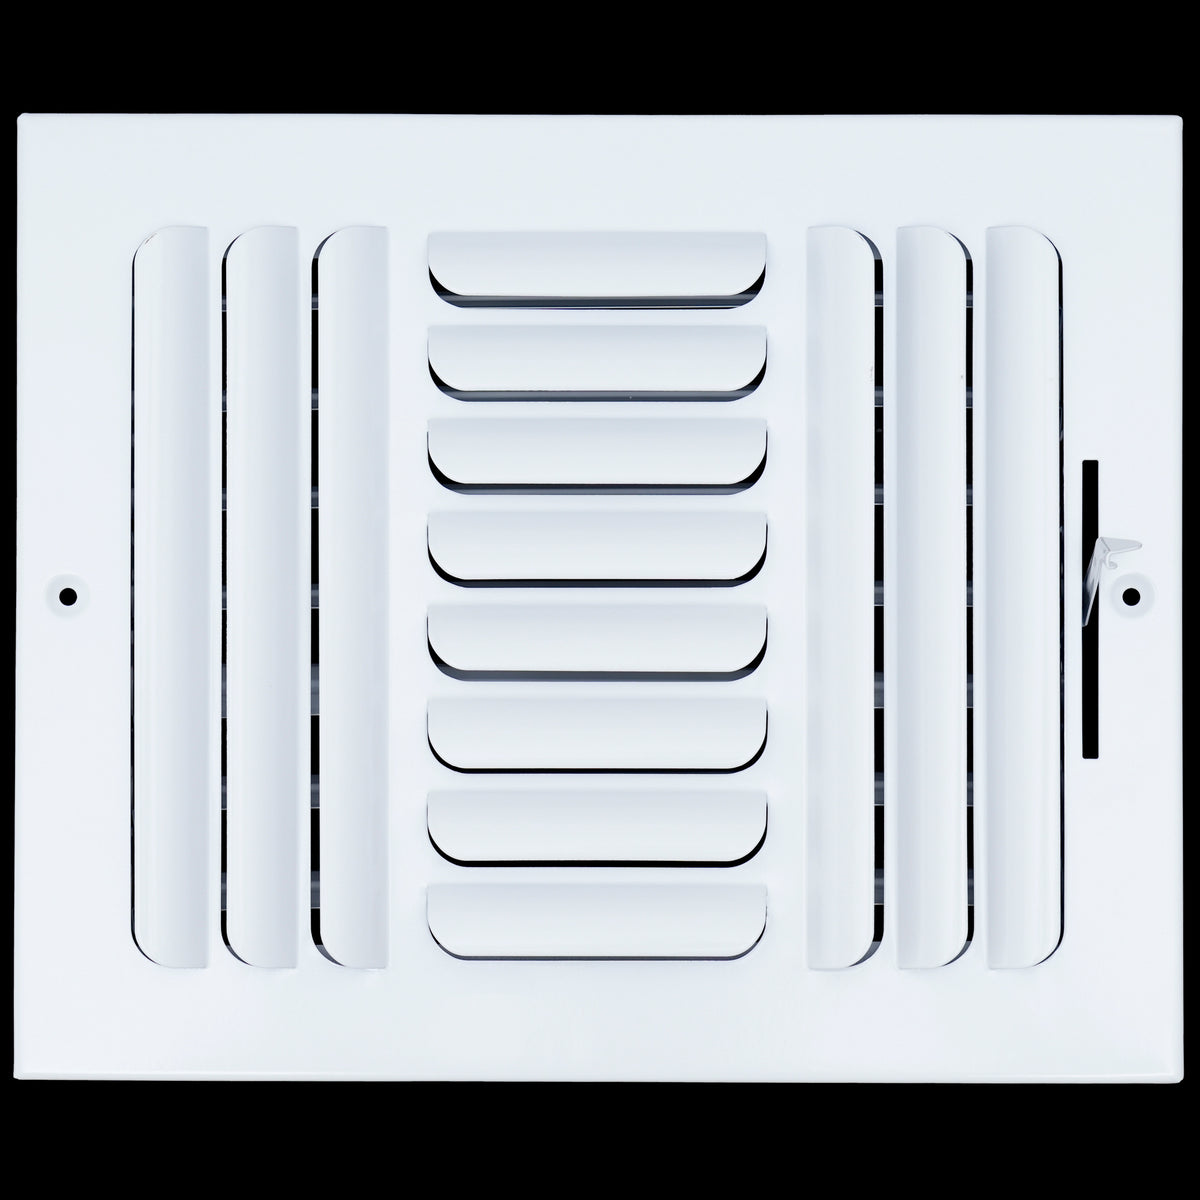 airgrilles 10"w x 8"h 3 way fixed curved blade air supply diffuser  -  register vent cover grill for sidewall and ceiling  -  white  -  outer dimensions: 11.75"w x 9.75"h hnd-cb-wh-3way-10x8  - 1